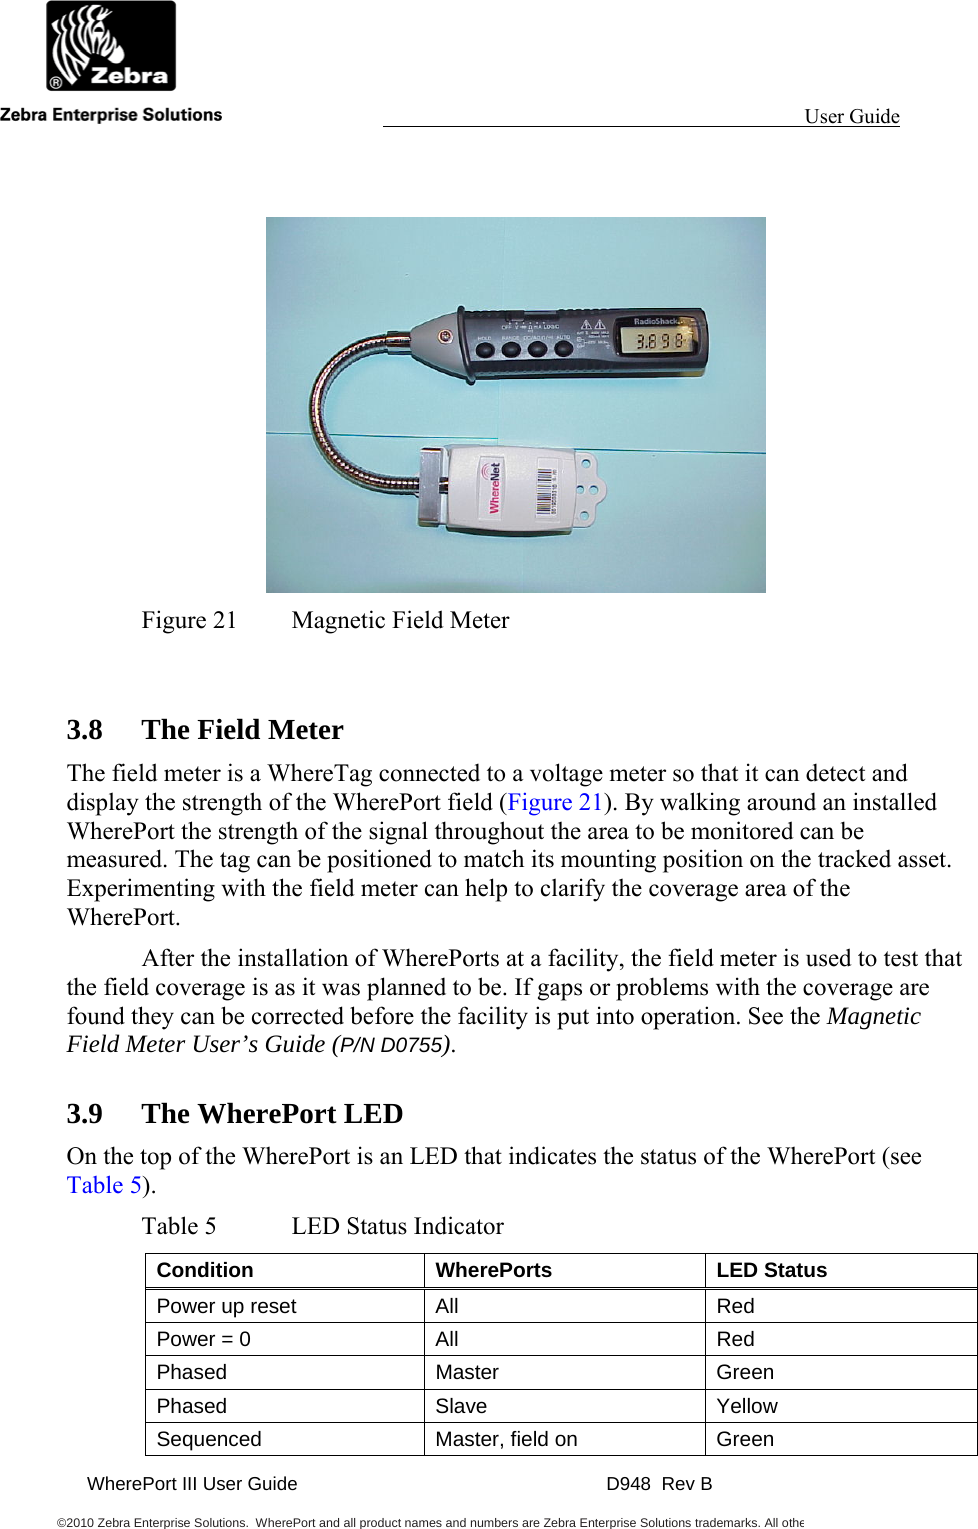                                                                                                                 User Guide                                               WherePort III User Guide    D948  Rev B  ©2010 Zebra Enterprise Solutions.  WherePort and all product names and numbers are Zebra Enterprise Solutions trademarks. All othe       Figure 21  Magnetic Field Meter  3.8 The Field Meter The field meter is a WhereTag connected to a voltage meter so that it can detect and display the strength of the WherePort field (Figure 21). By walking around an installed WherePort the strength of the signal throughout the area to be monitored can be measured. The tag can be positioned to match its mounting position on the tracked asset. Experimenting with the field meter can help to clarify the coverage area of the WherePort.   After the installation of WherePorts at a facility, the field meter is used to test that the field coverage is as it was planned to be. If gaps or problems with the coverage are found they can be corrected before the facility is put into operation. See the Magnetic Field Meter User’s Guide (P/N D0755). 3.9 The WherePort LED On the top of the WherePort is an LED that indicates the status of the WherePort (see Table 5). Table 5  LED Status Indicator Condition WherePorts LED Status Power up reset  All  Red Power = 0  All  Red Phased Master  Green Phased Slave  Yellow Sequenced  Master, field on  Green 